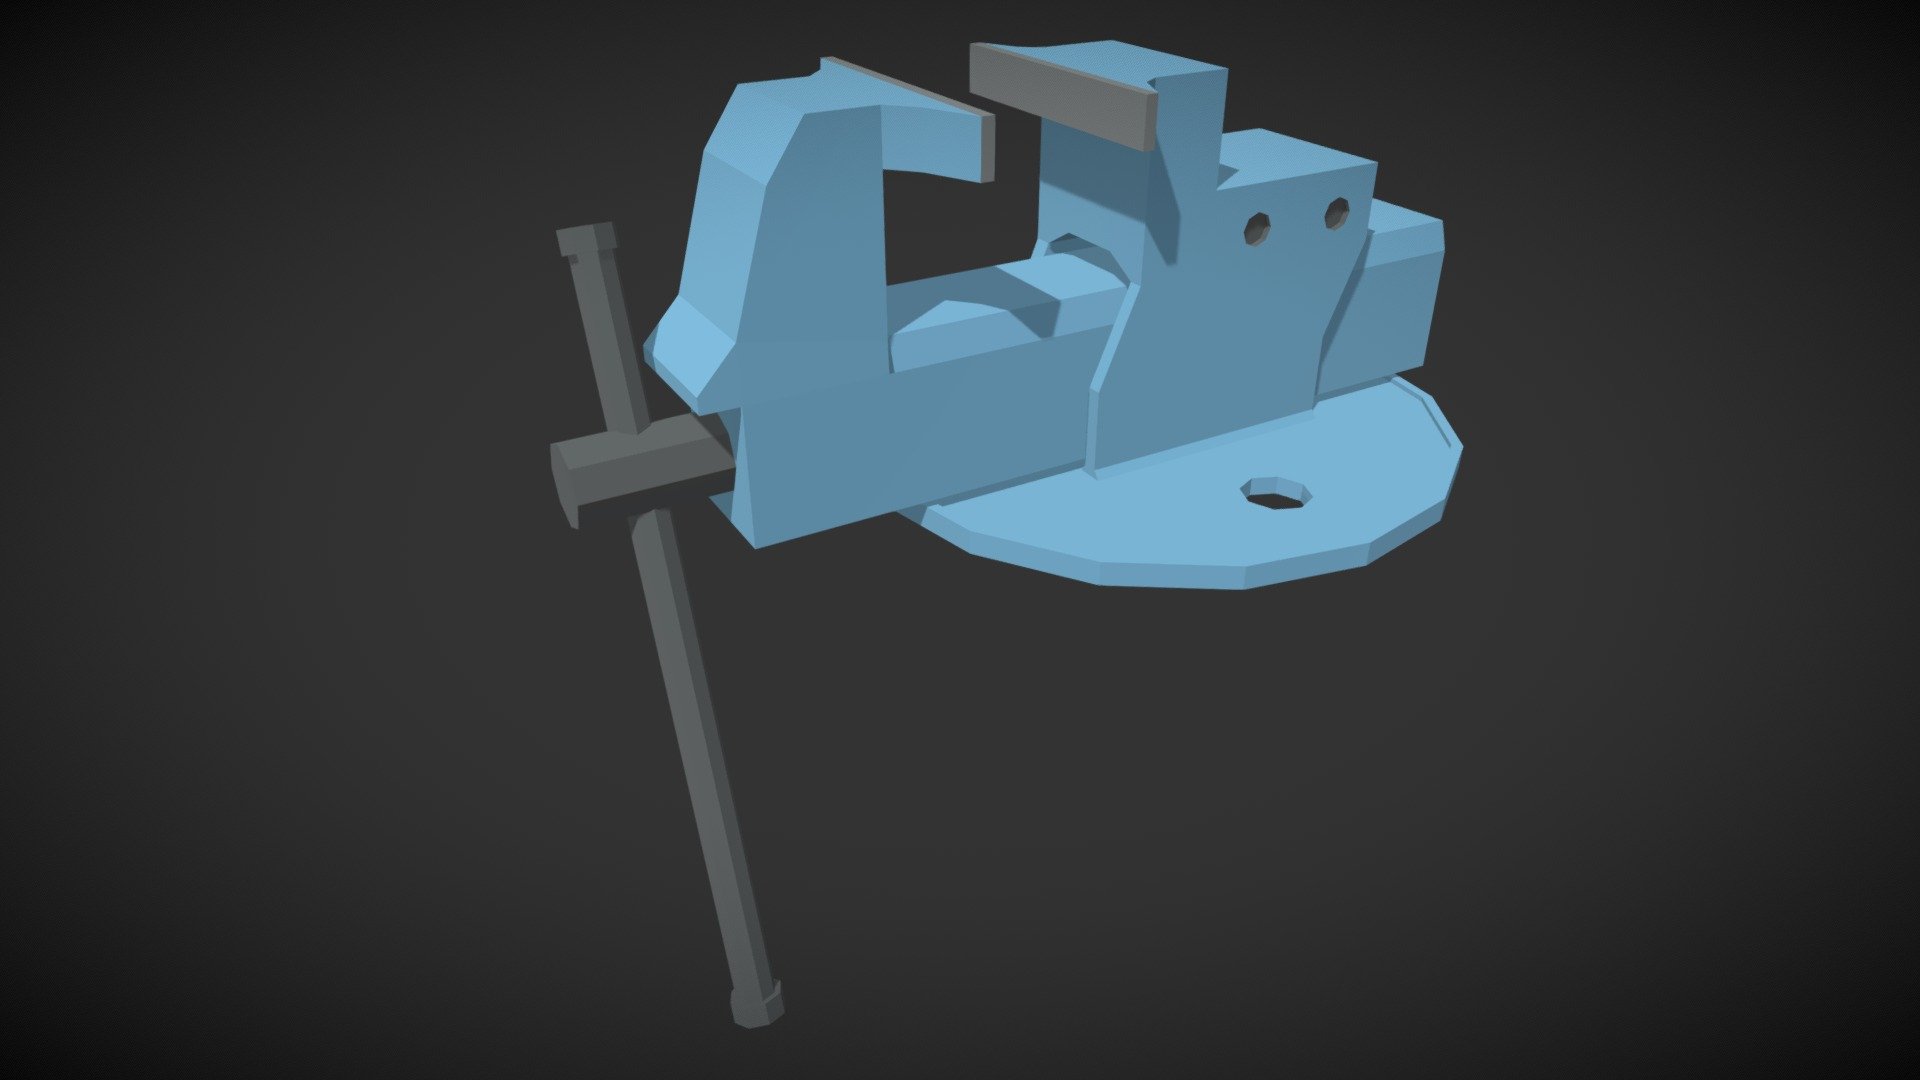 A simple lowpoly vise. You could use it for your next game or video 3d model